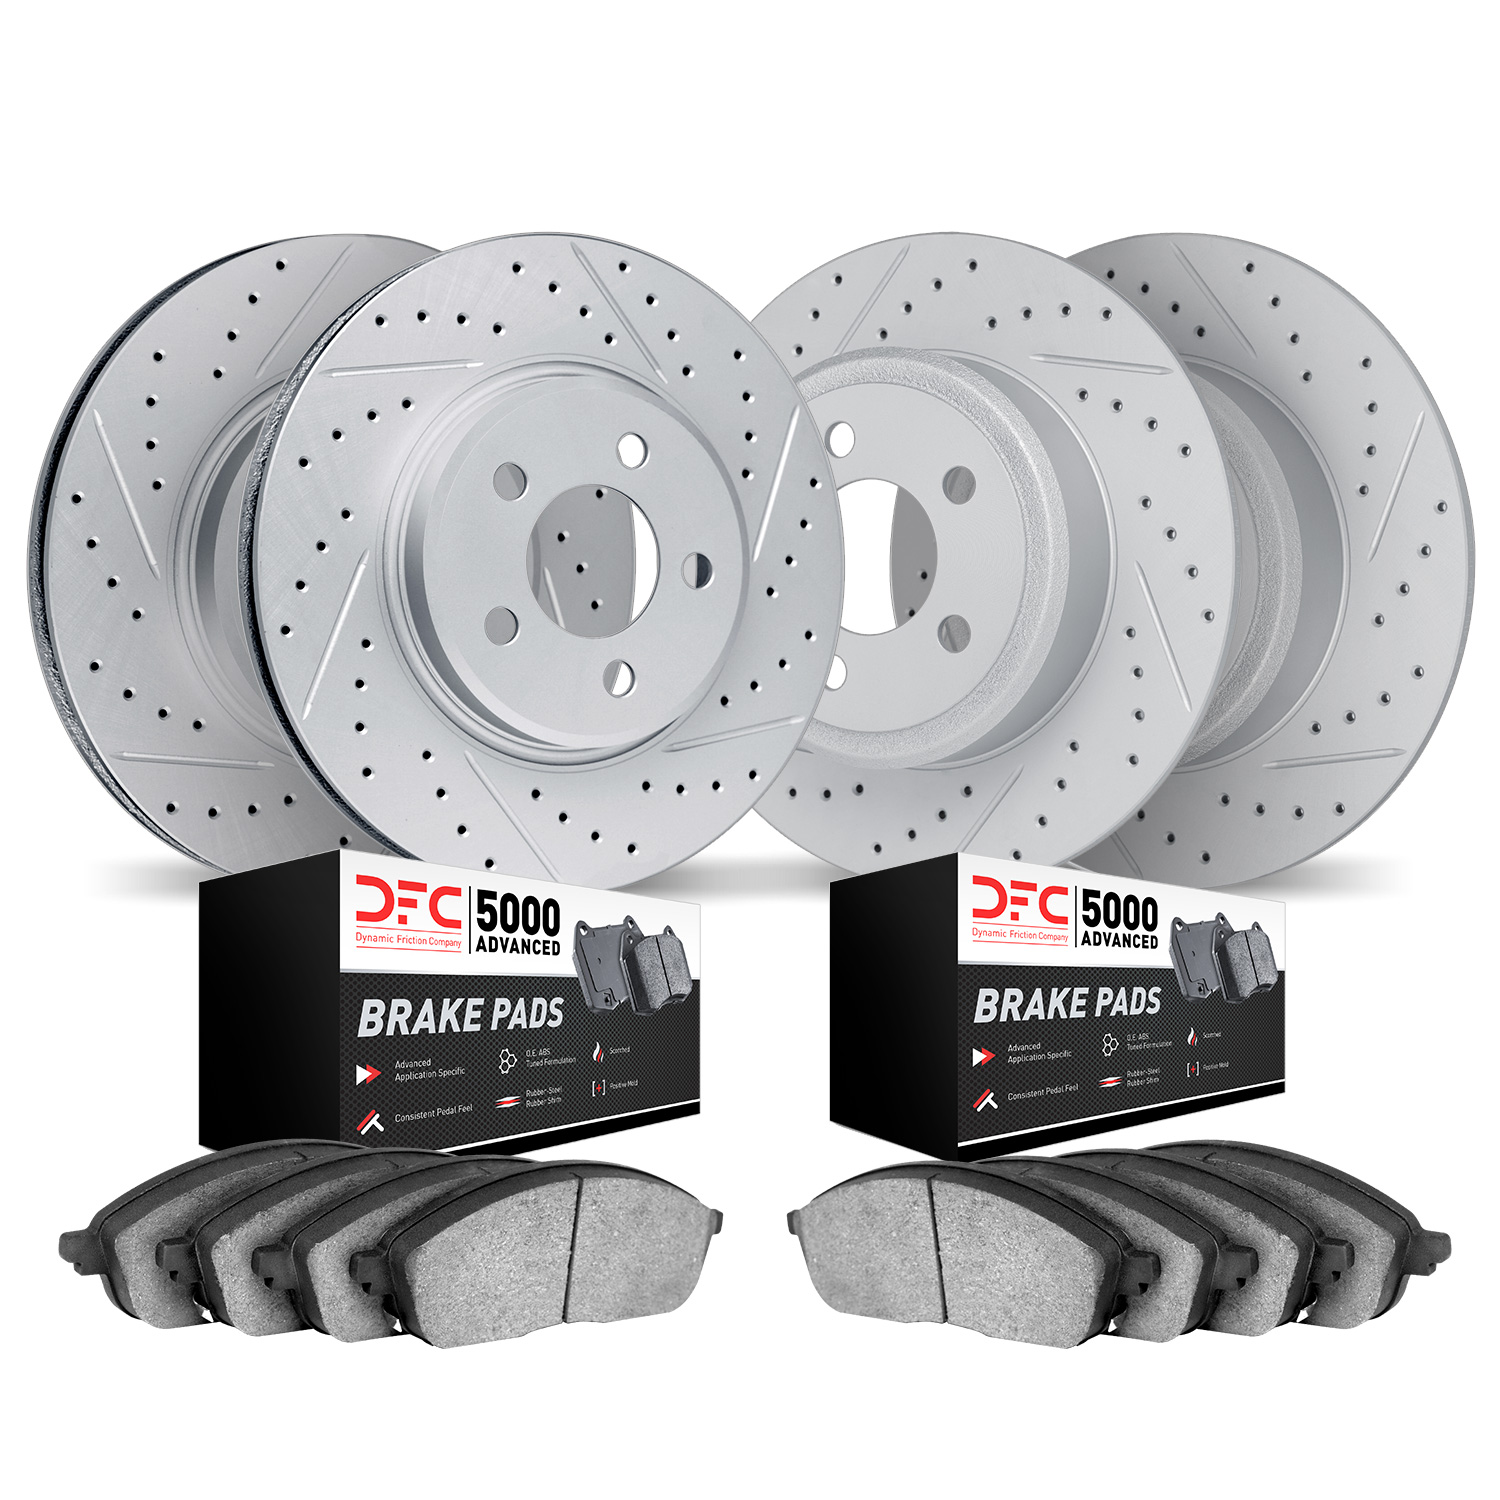 2504-27004 Geoperformance Drilled/Slotted Rotors w/5000 Advanced Brake Pads Kit, 2012-2013 Volvo, Position: Front and Rear